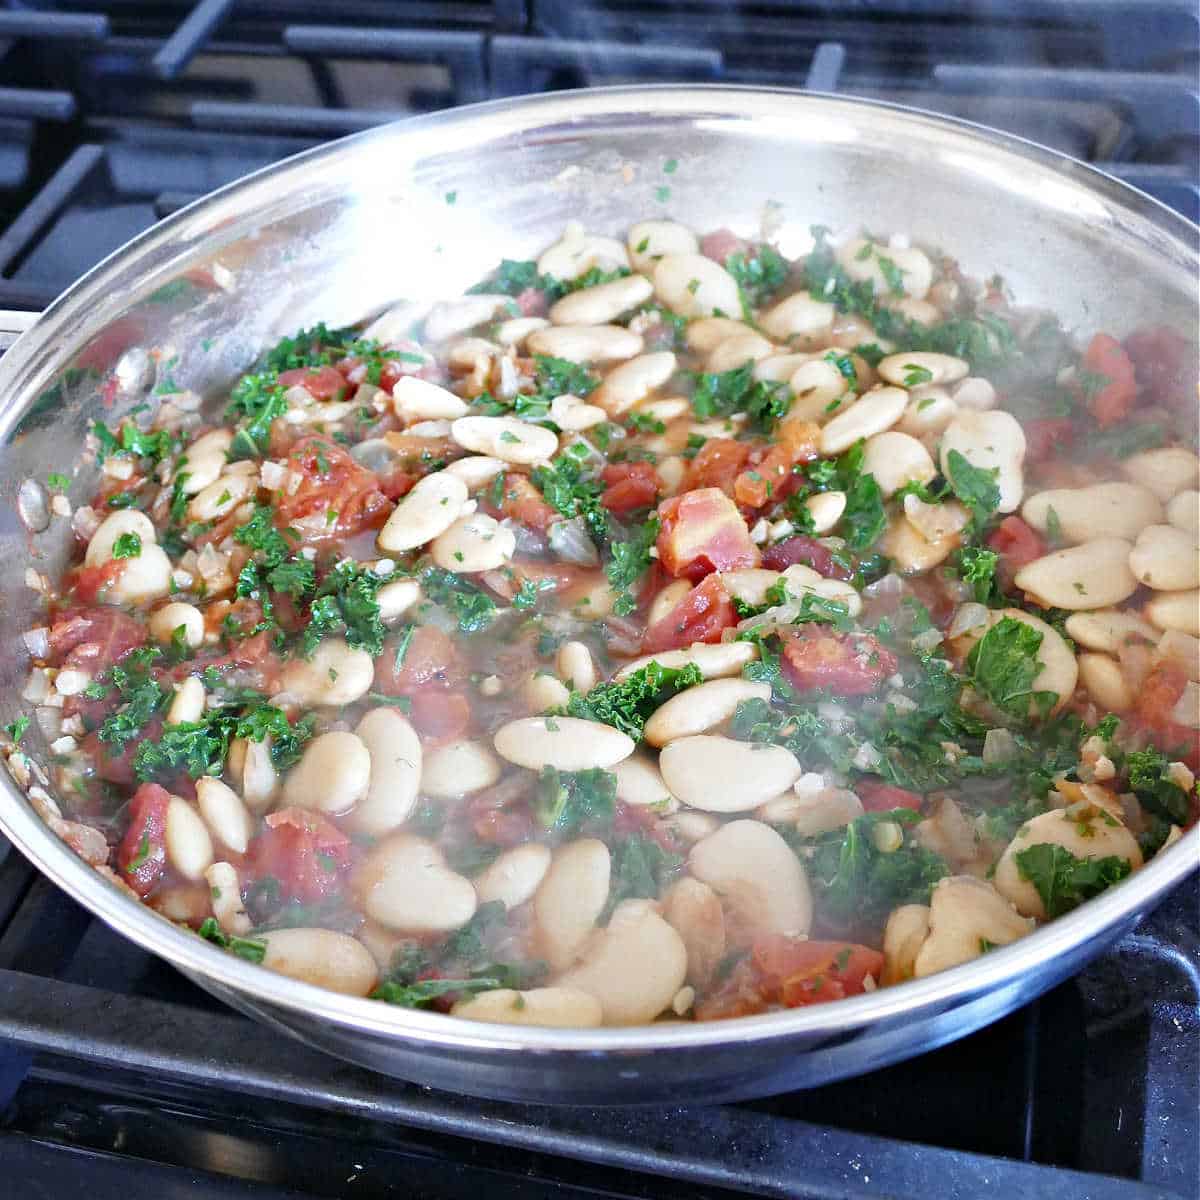 gigante beans, tomatoes, kale, and other seasonings simmering in a skillet on the stove